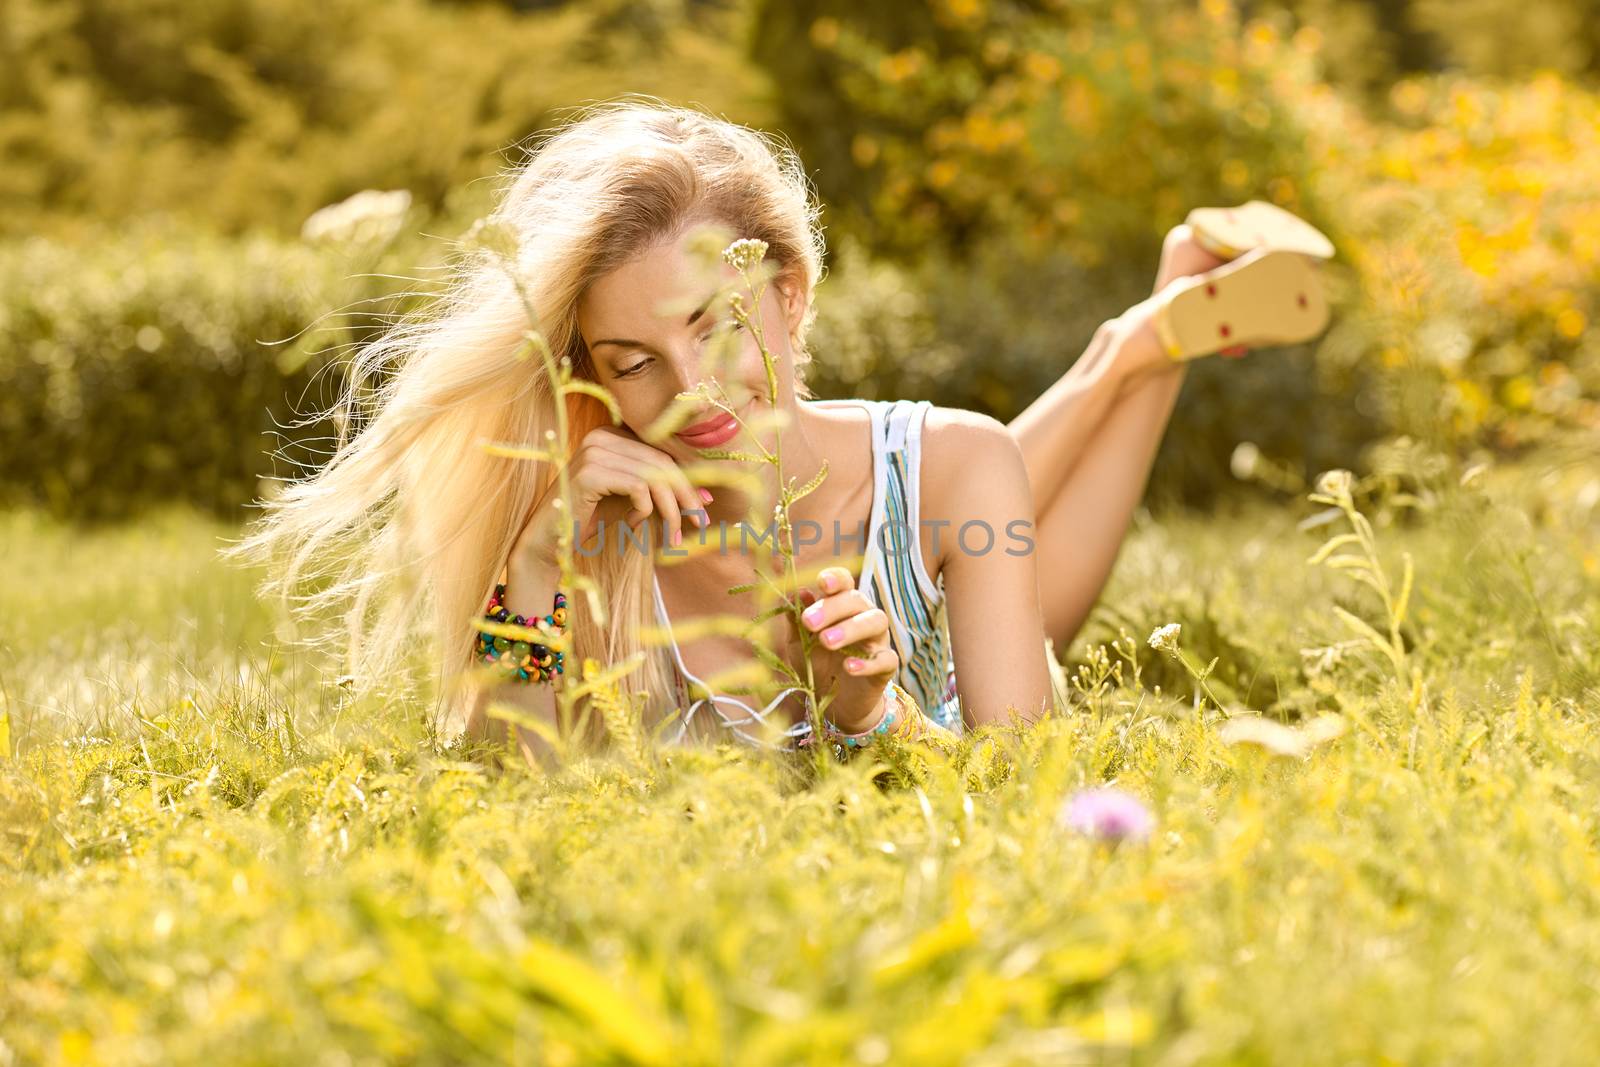 Beauty playful woman relax, garden, people outdoor by 918